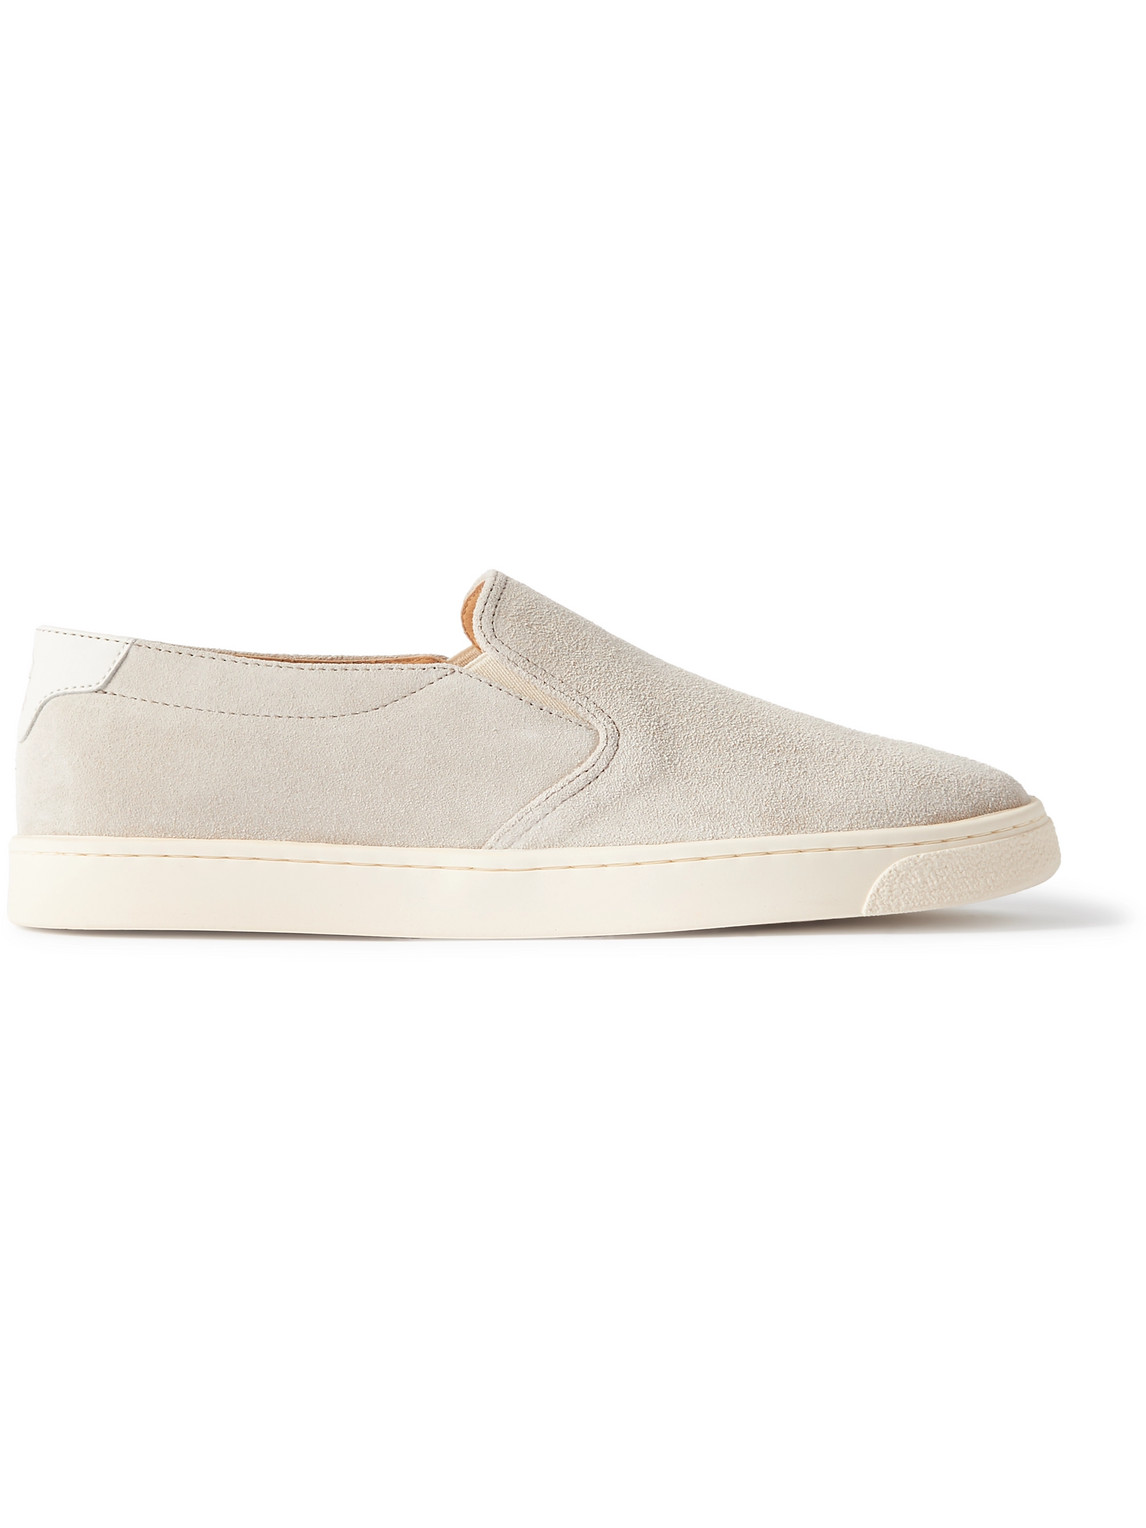 Brunello Cucinelli Leather-trimmed Suede Slip-on Sneakers In Neutrals